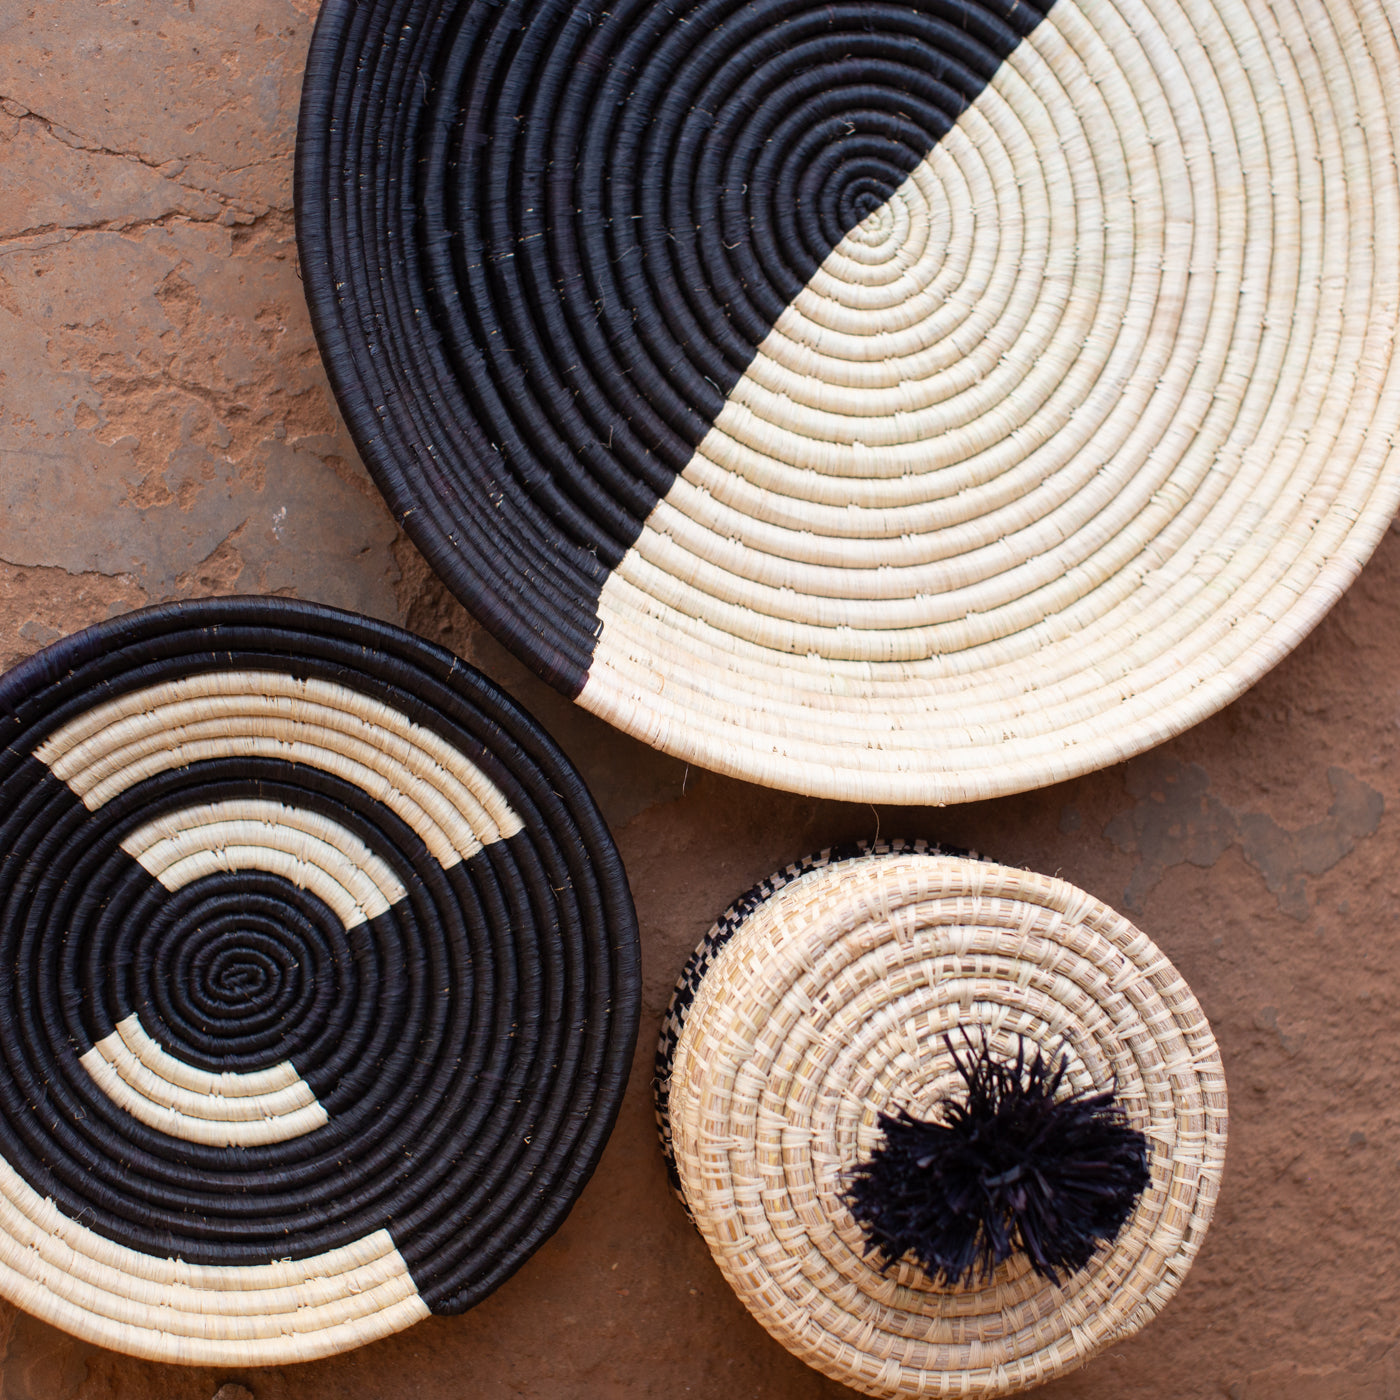 JustOne's black and neutral handwoven hanging basket from Uganda